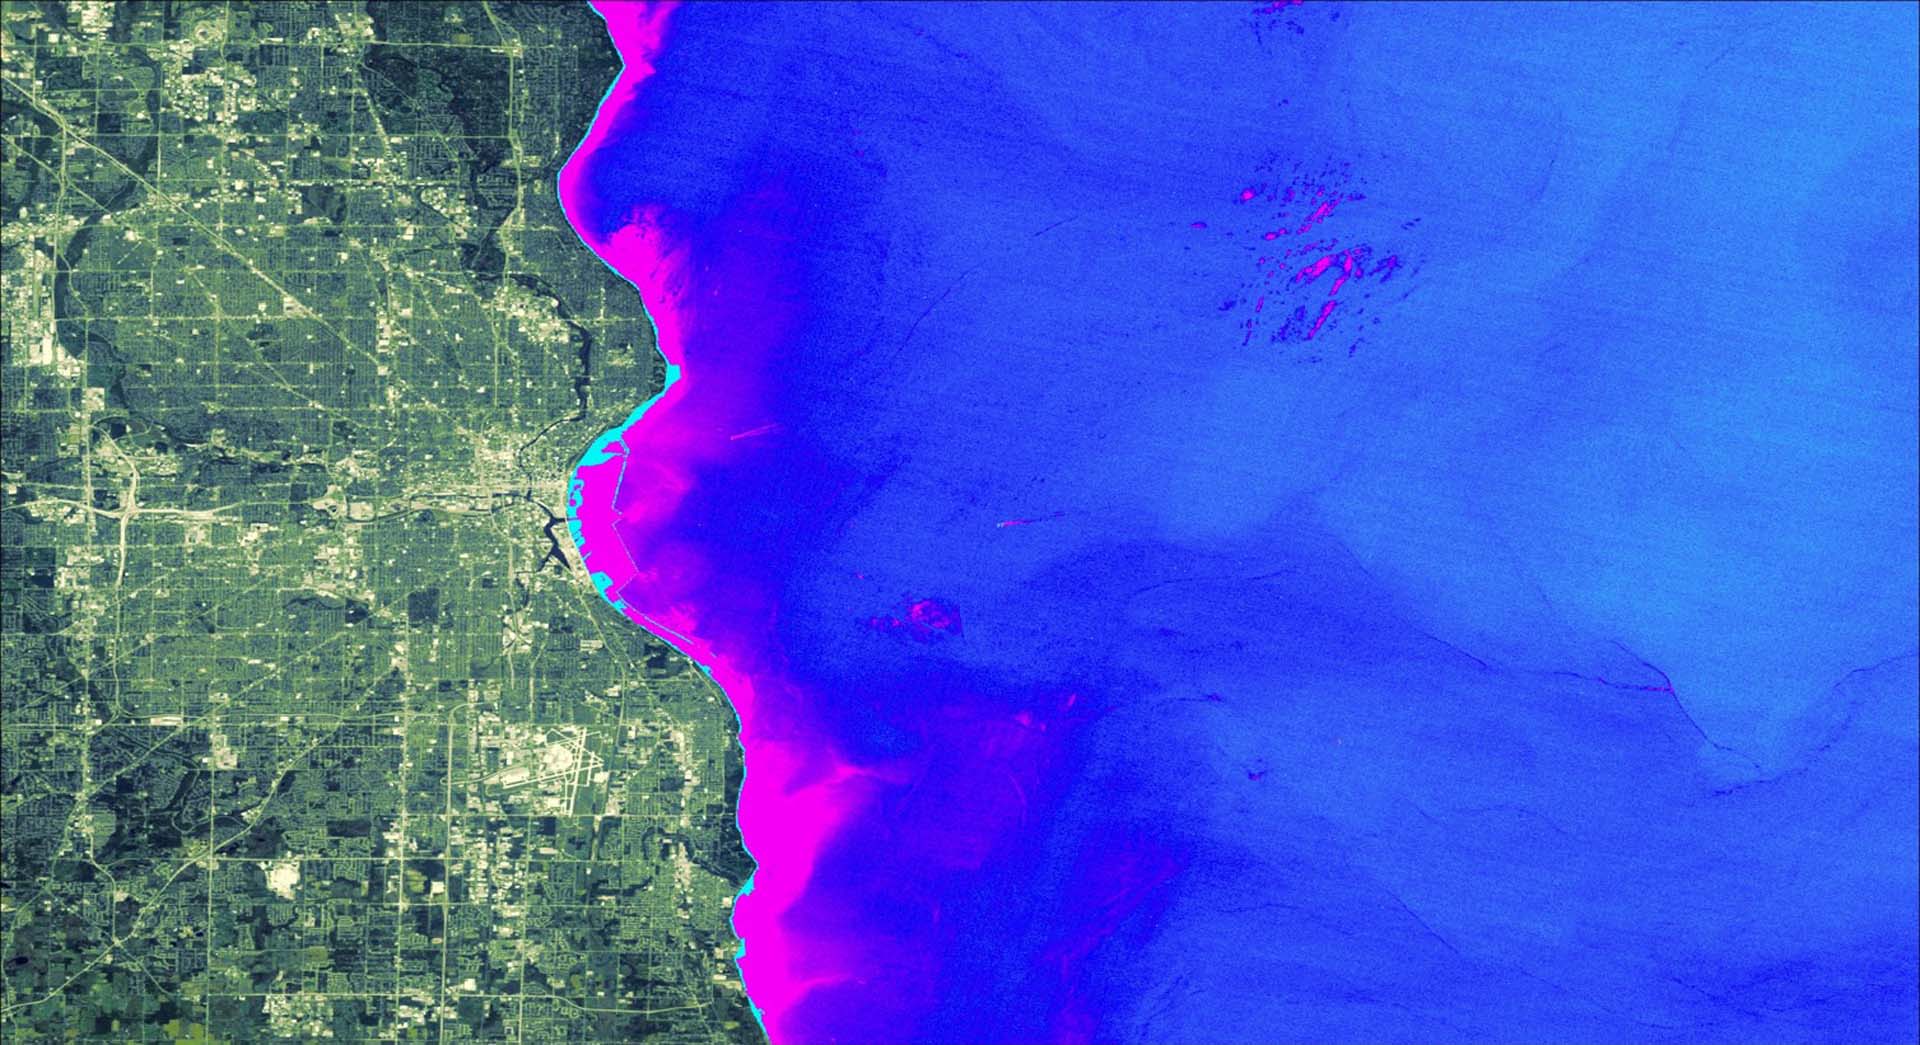 Utilizing NASA Earth Observations and Community Science to Detect and Map the Displacement of Cladophora along the Milwaukee County Shoreline